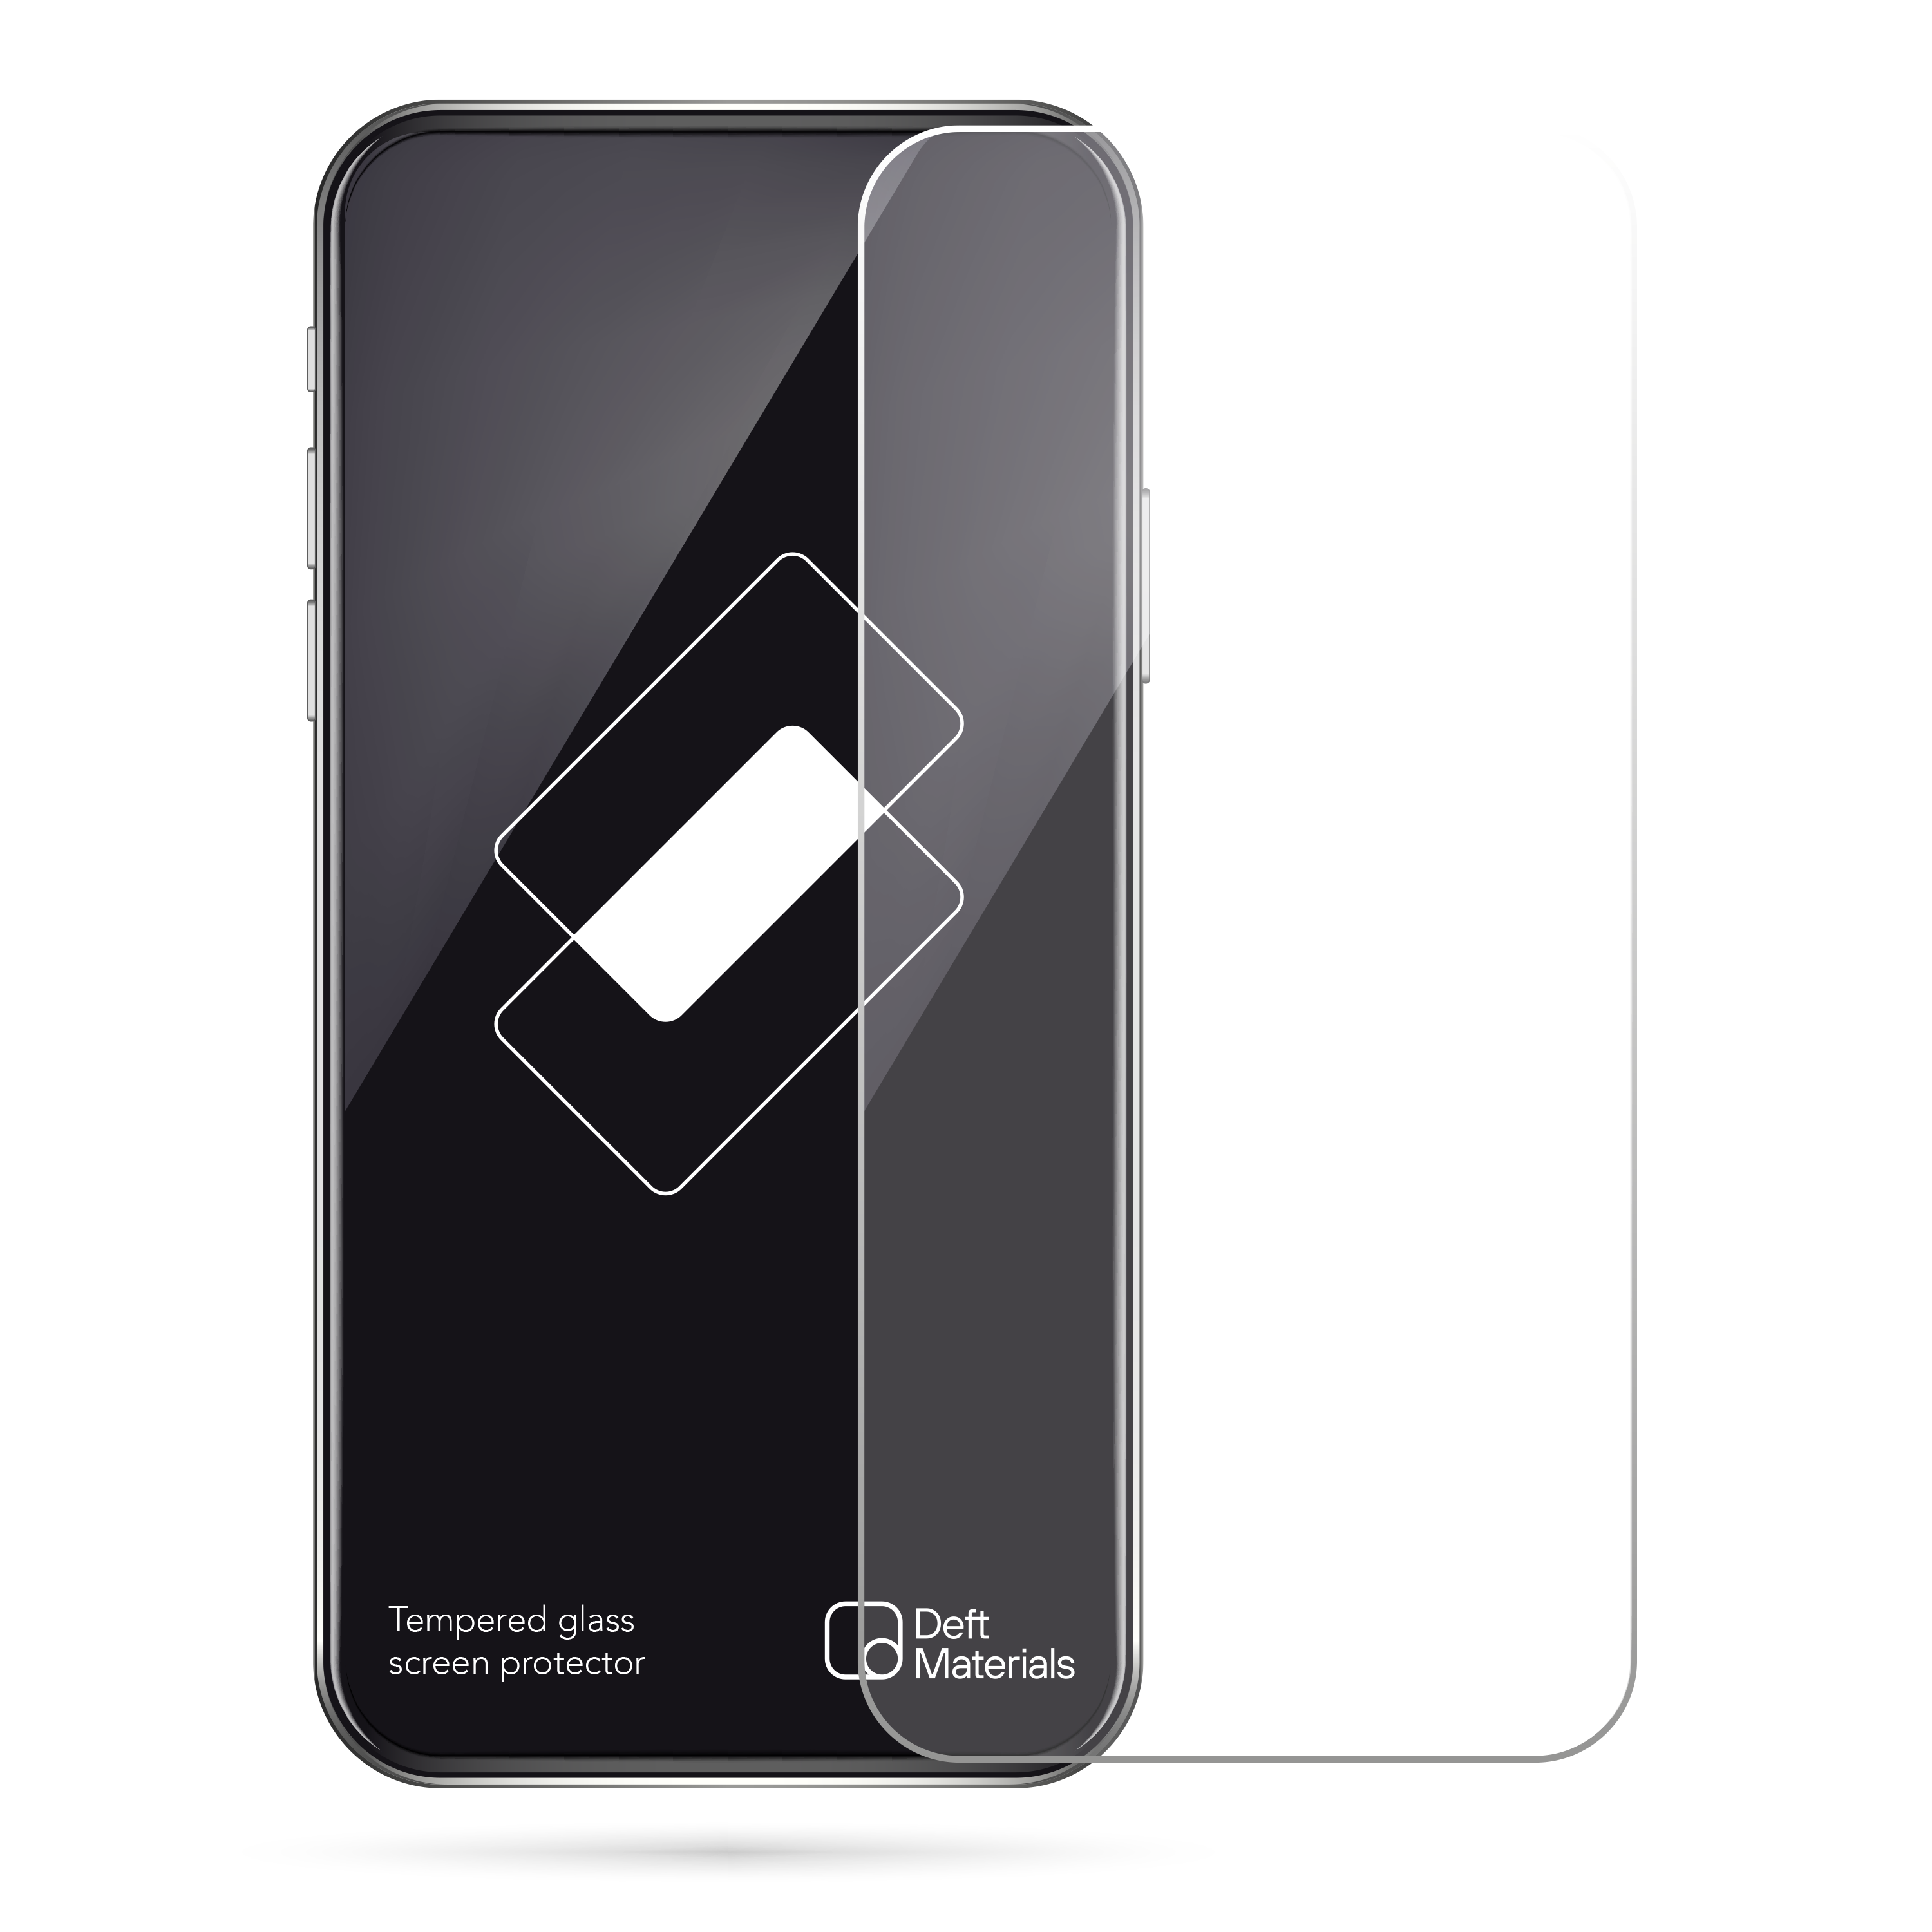 iPhone Tempered glass screen protector